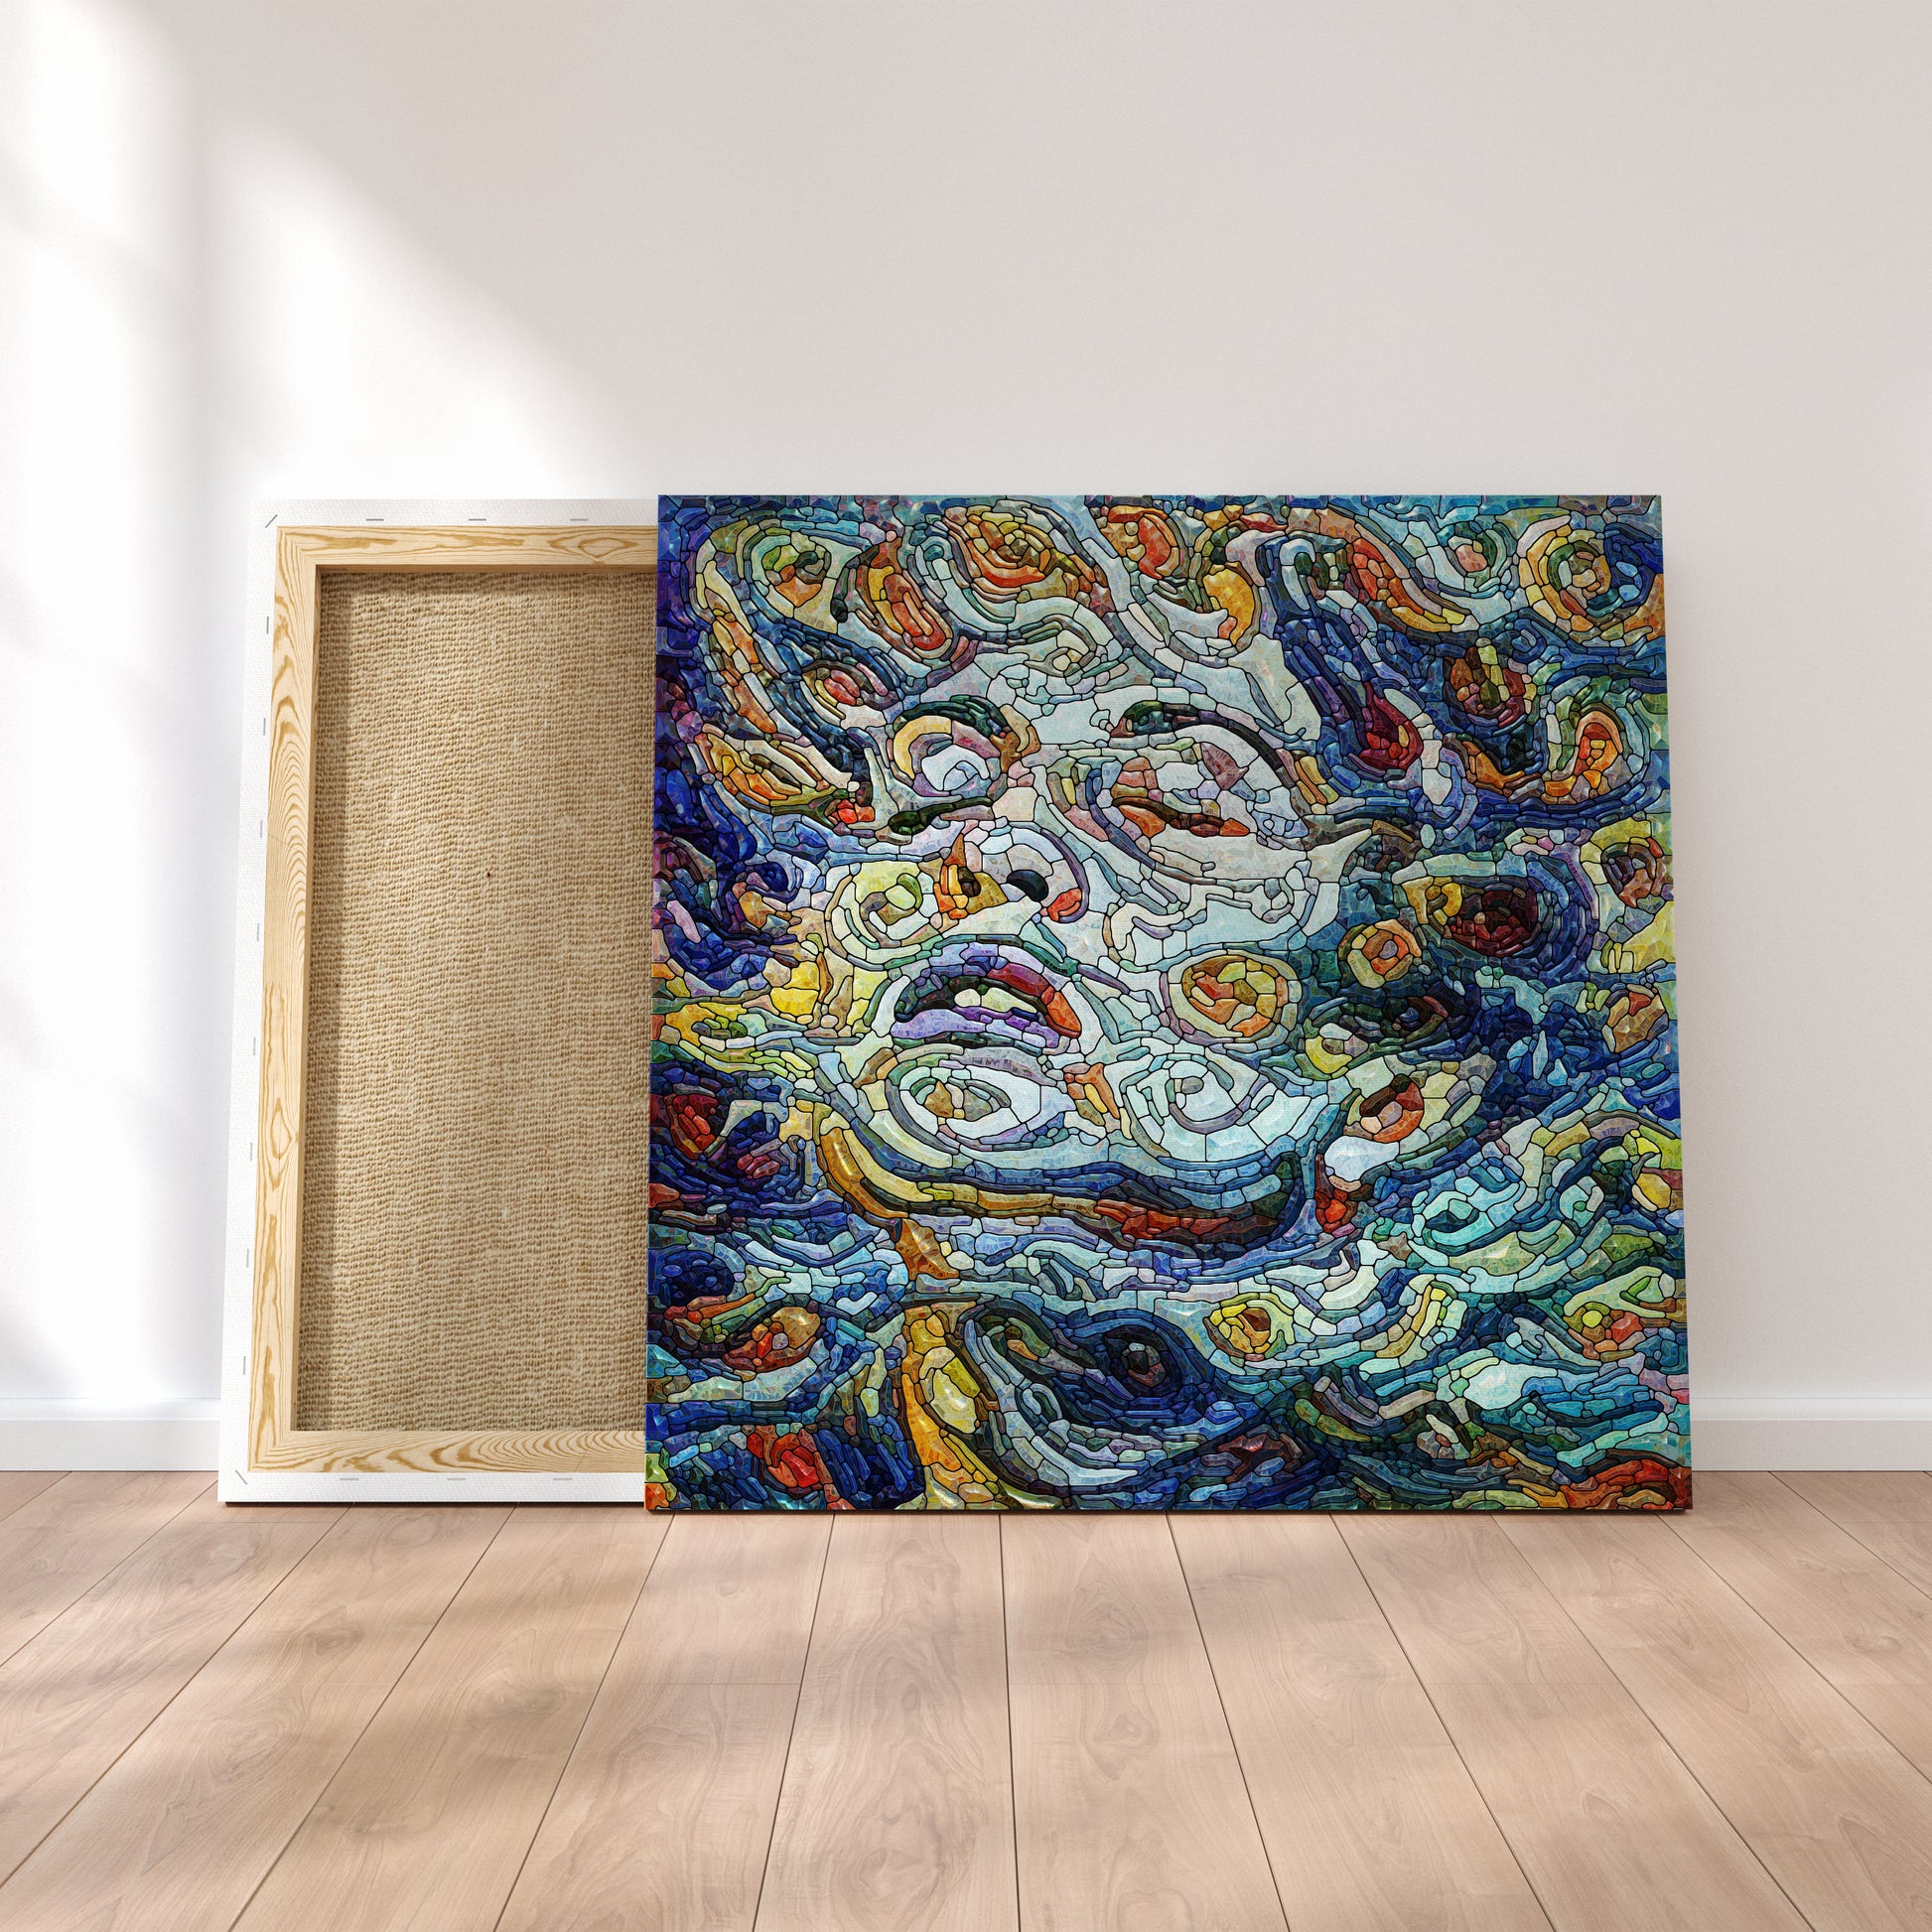 Abstract Vintage Colorful Woman Portrait Canvas Print ArtLexy 1 Panel 12"x12" inches 